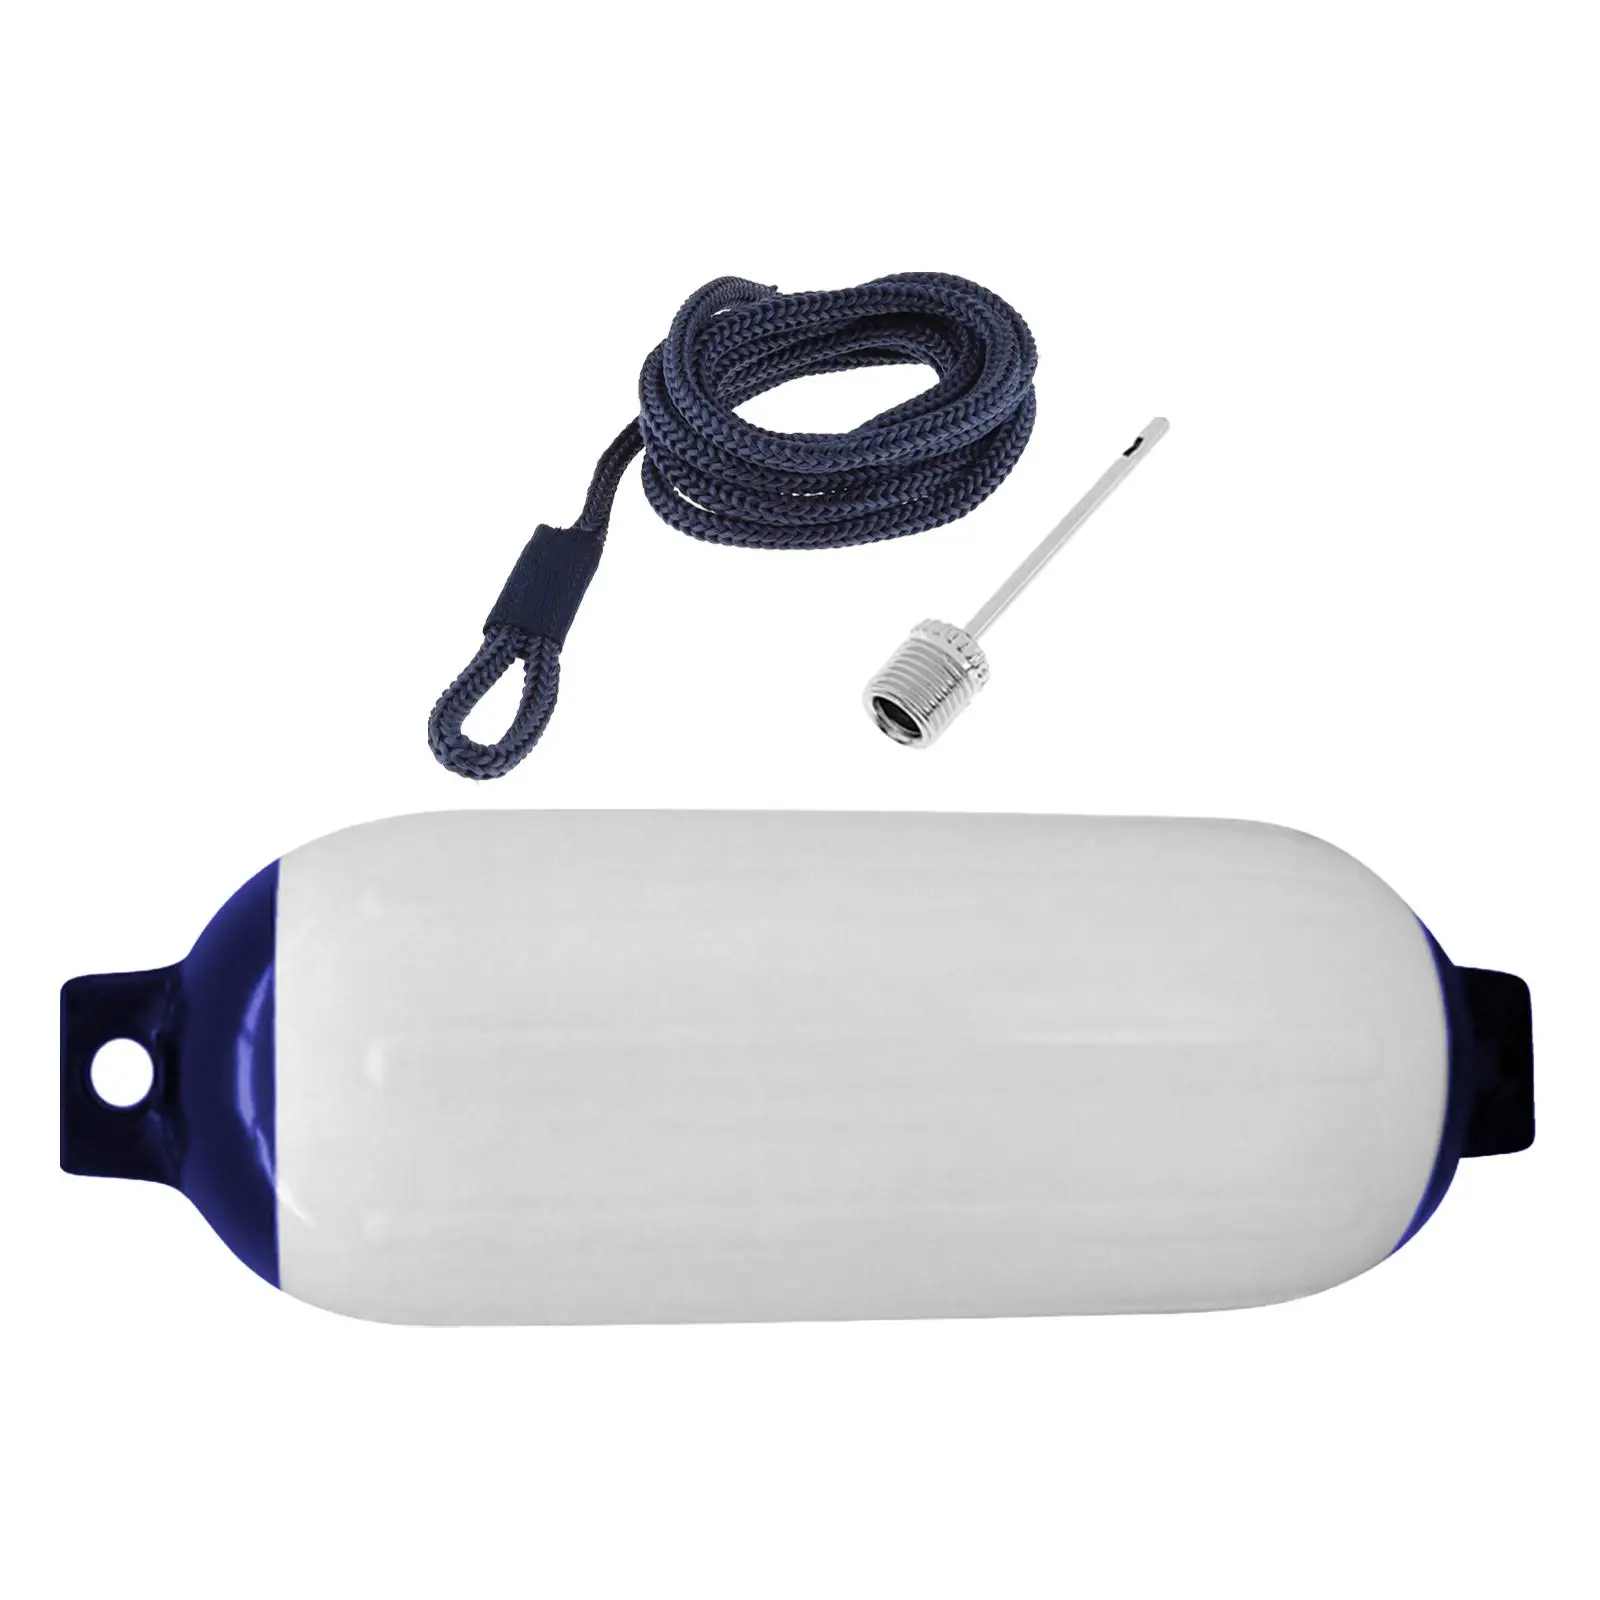 Boat Fender Kit 4x16inch with Rope and Needle Boat Bumper Protector for Docking